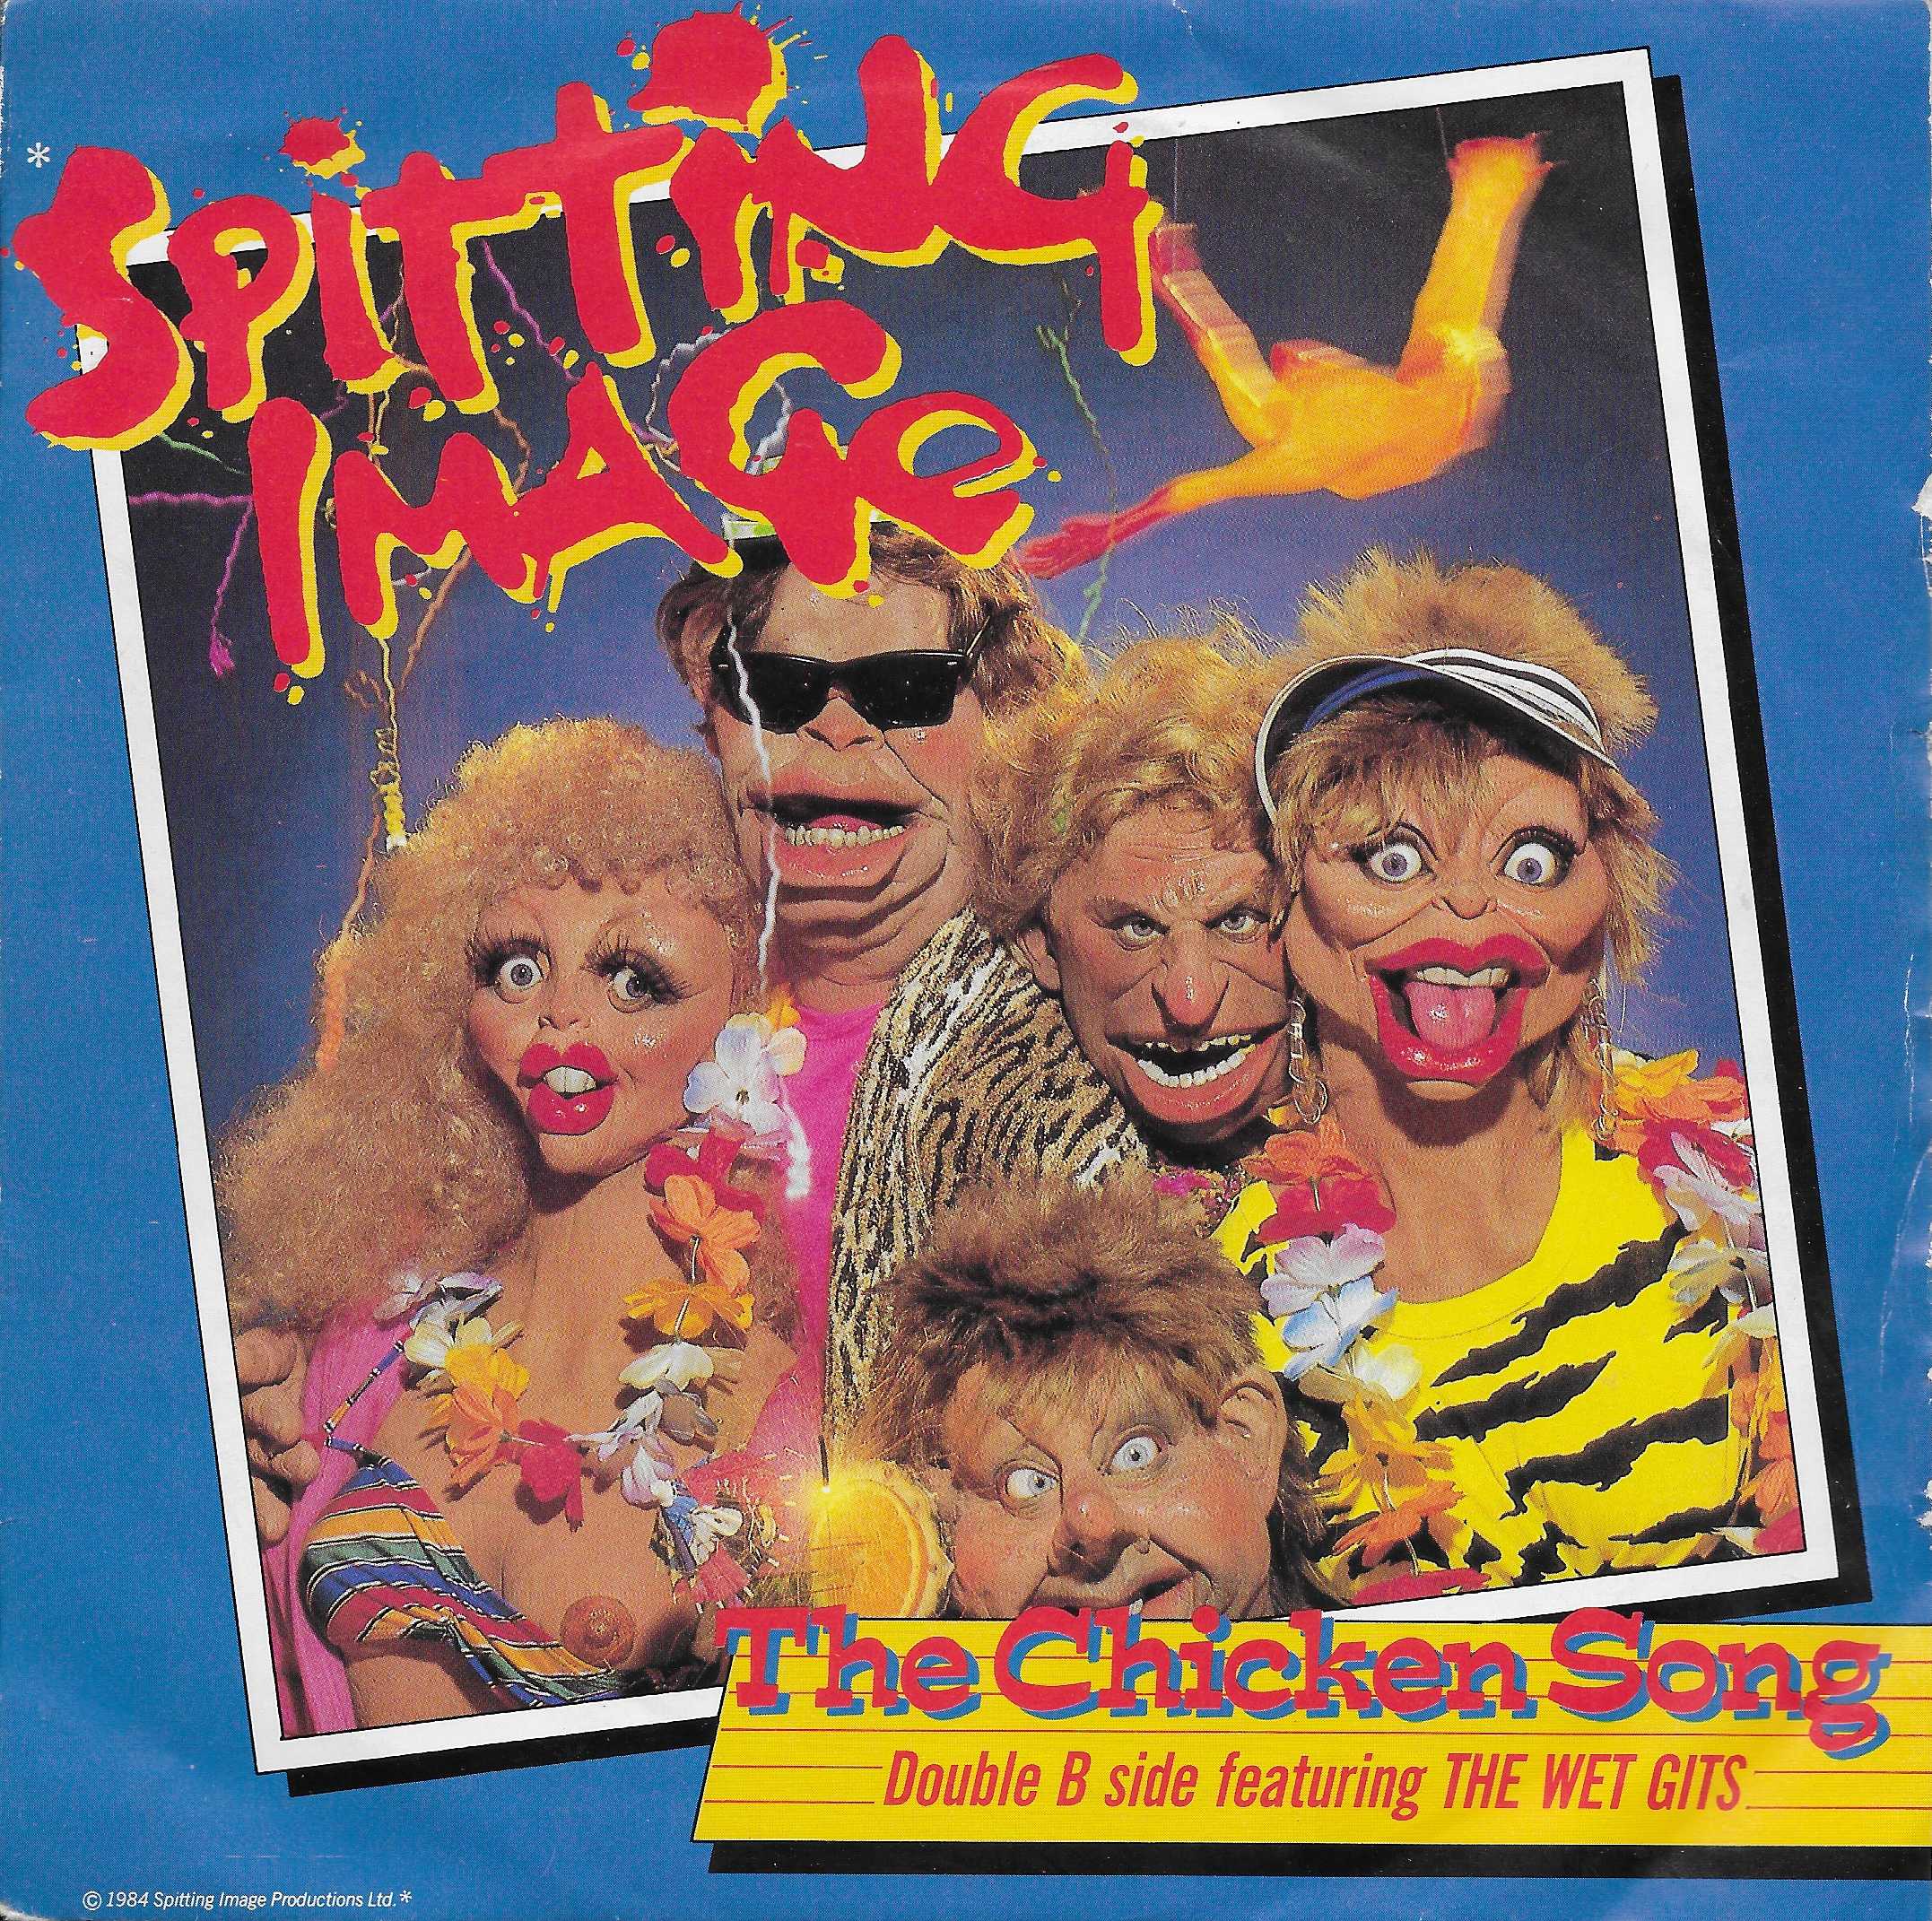 Picture of The chicken song (Spitting image) by artist Pope / Grant / Naylor from ITV, Channel 4 and Channel 5 singles library